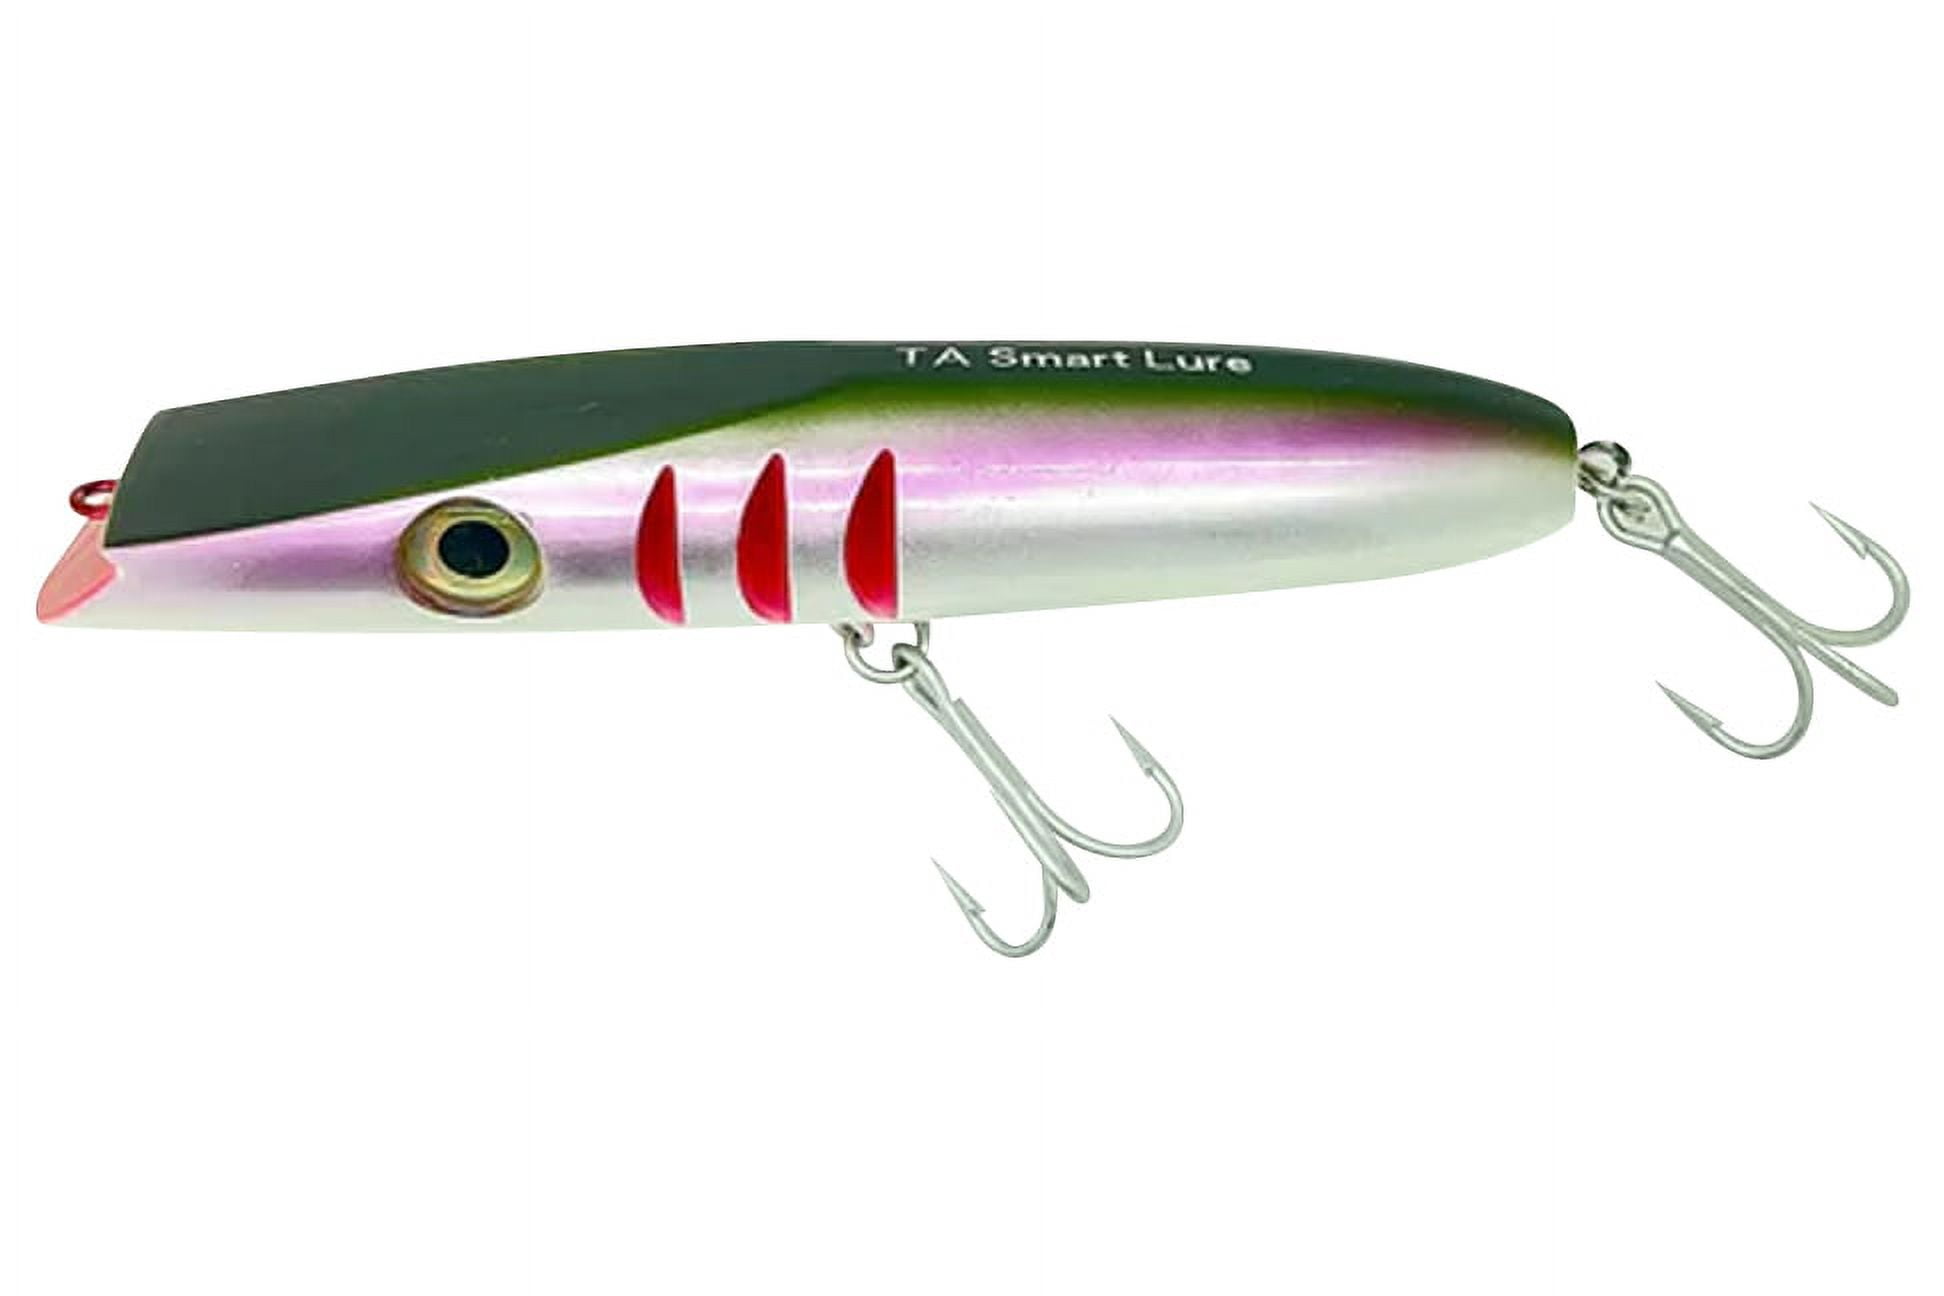 Tactical Anglers Sub Darter Smart Lures, 7, 3oz, Olive & Turquoise